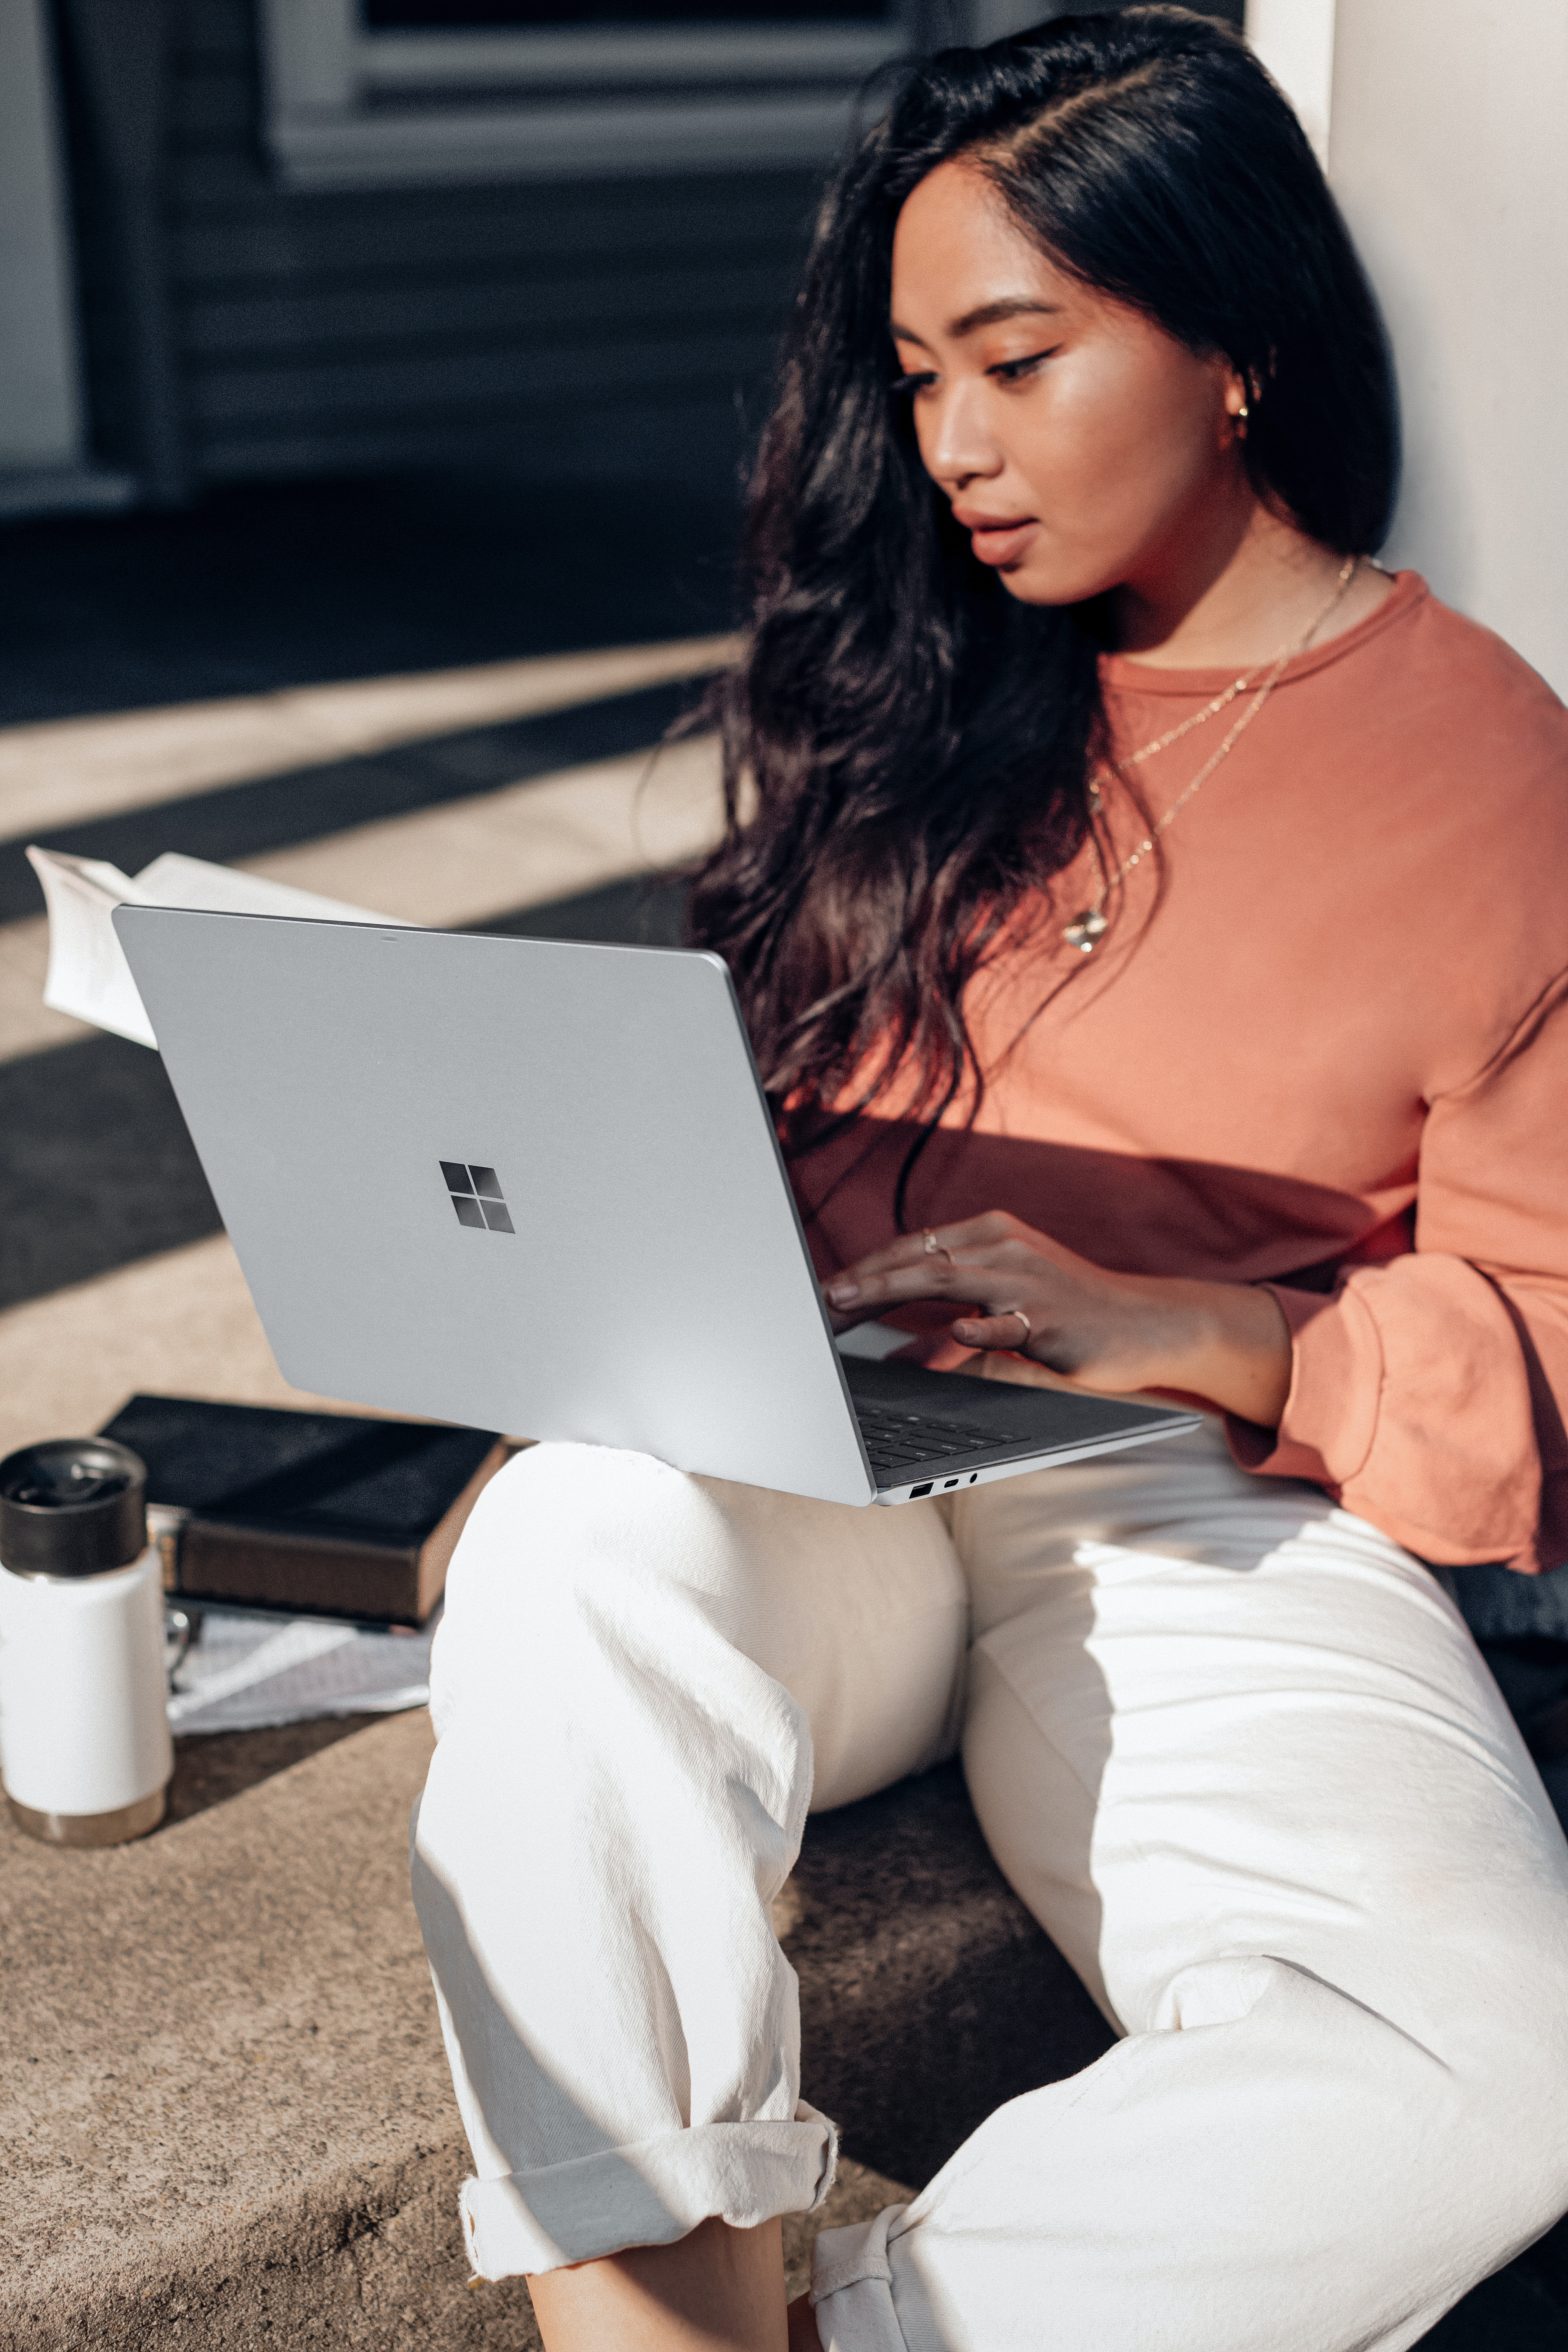 A racialized woman sits in front of a laptop working.